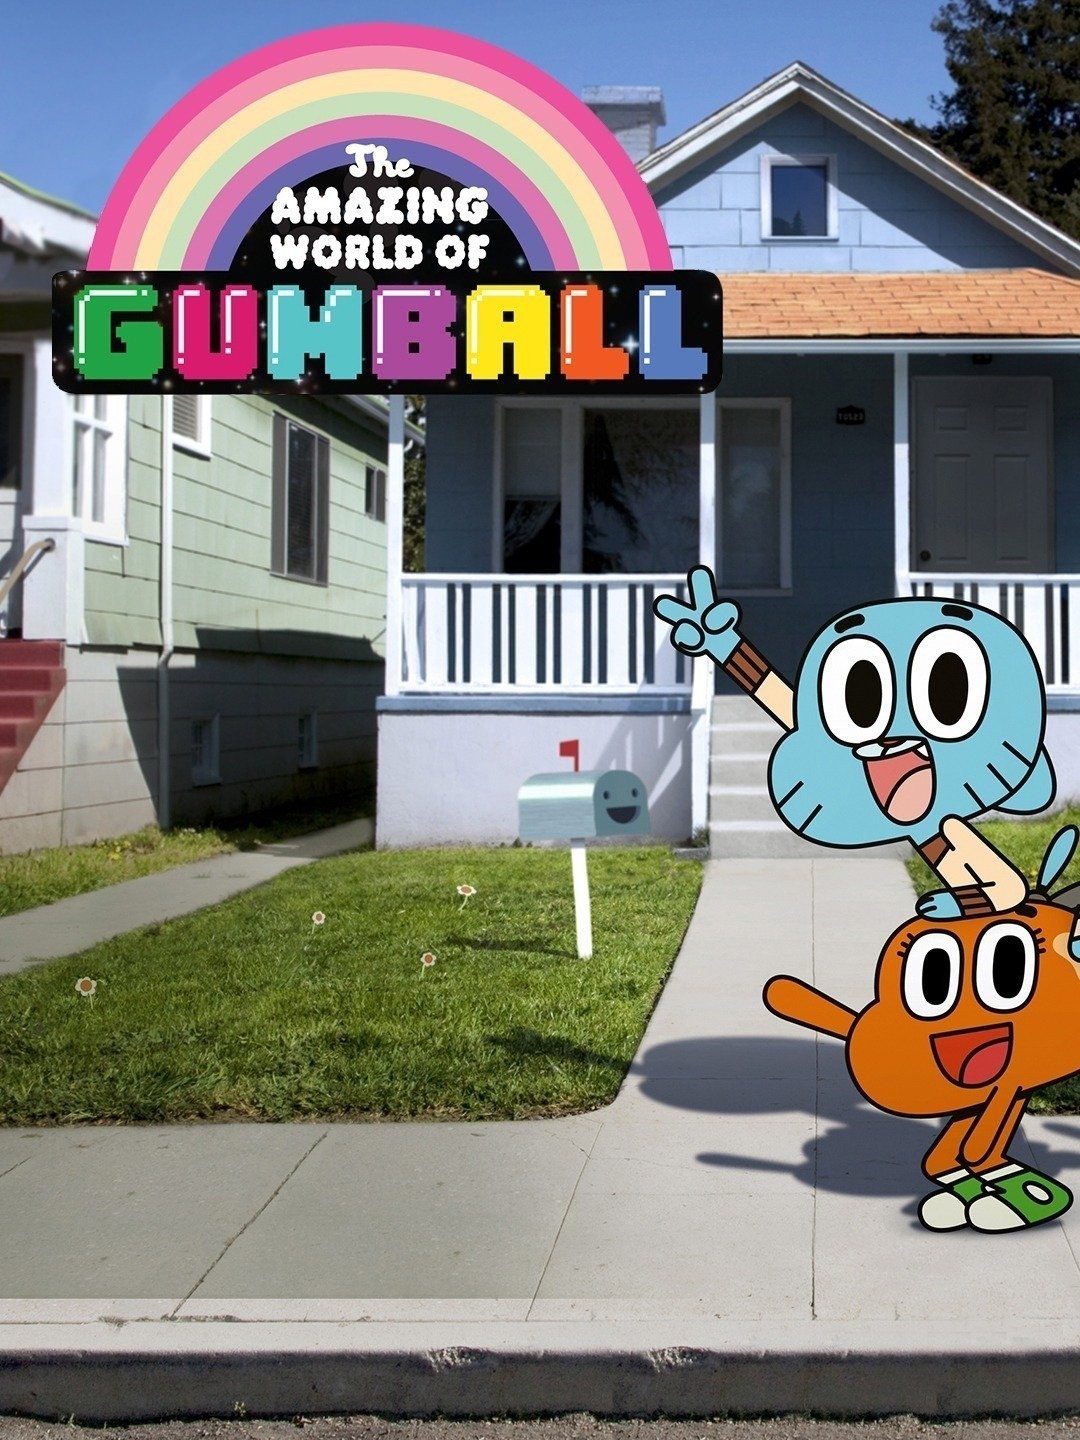 I went from Spain to the real Gumball House. It was a 15-hour trip